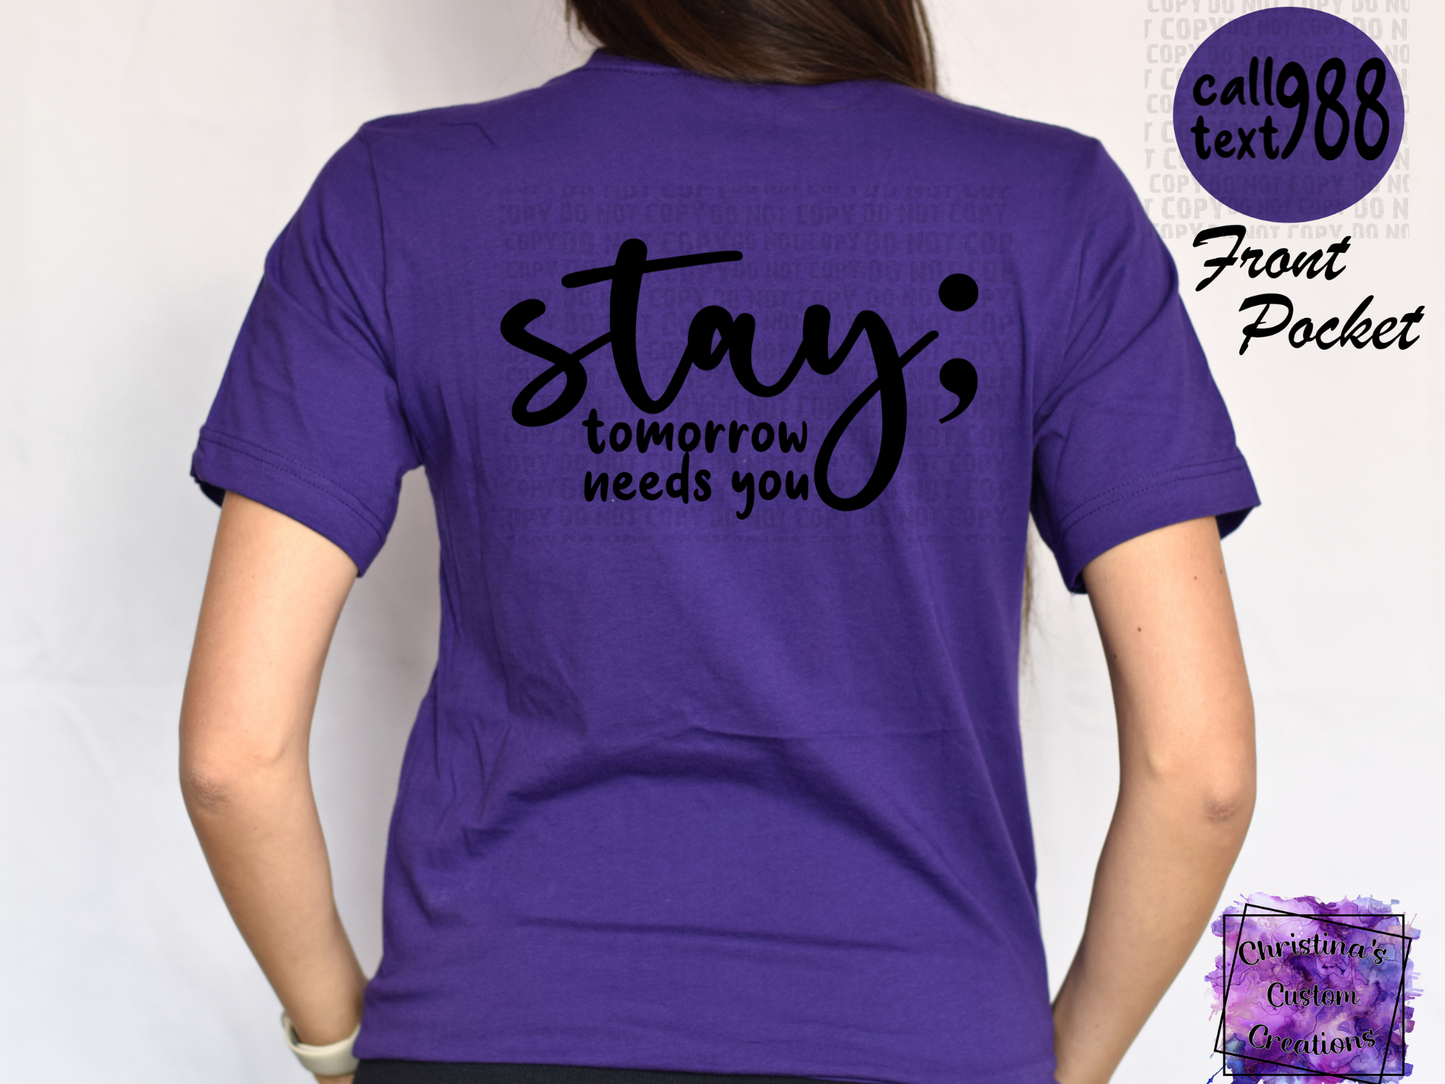 988 Stay T-Shirt | Suicide Awareness Shirt | Stay The World Needs You In It T-Shirt | Fast Shipping | Super Soft Shirts for Men/Women